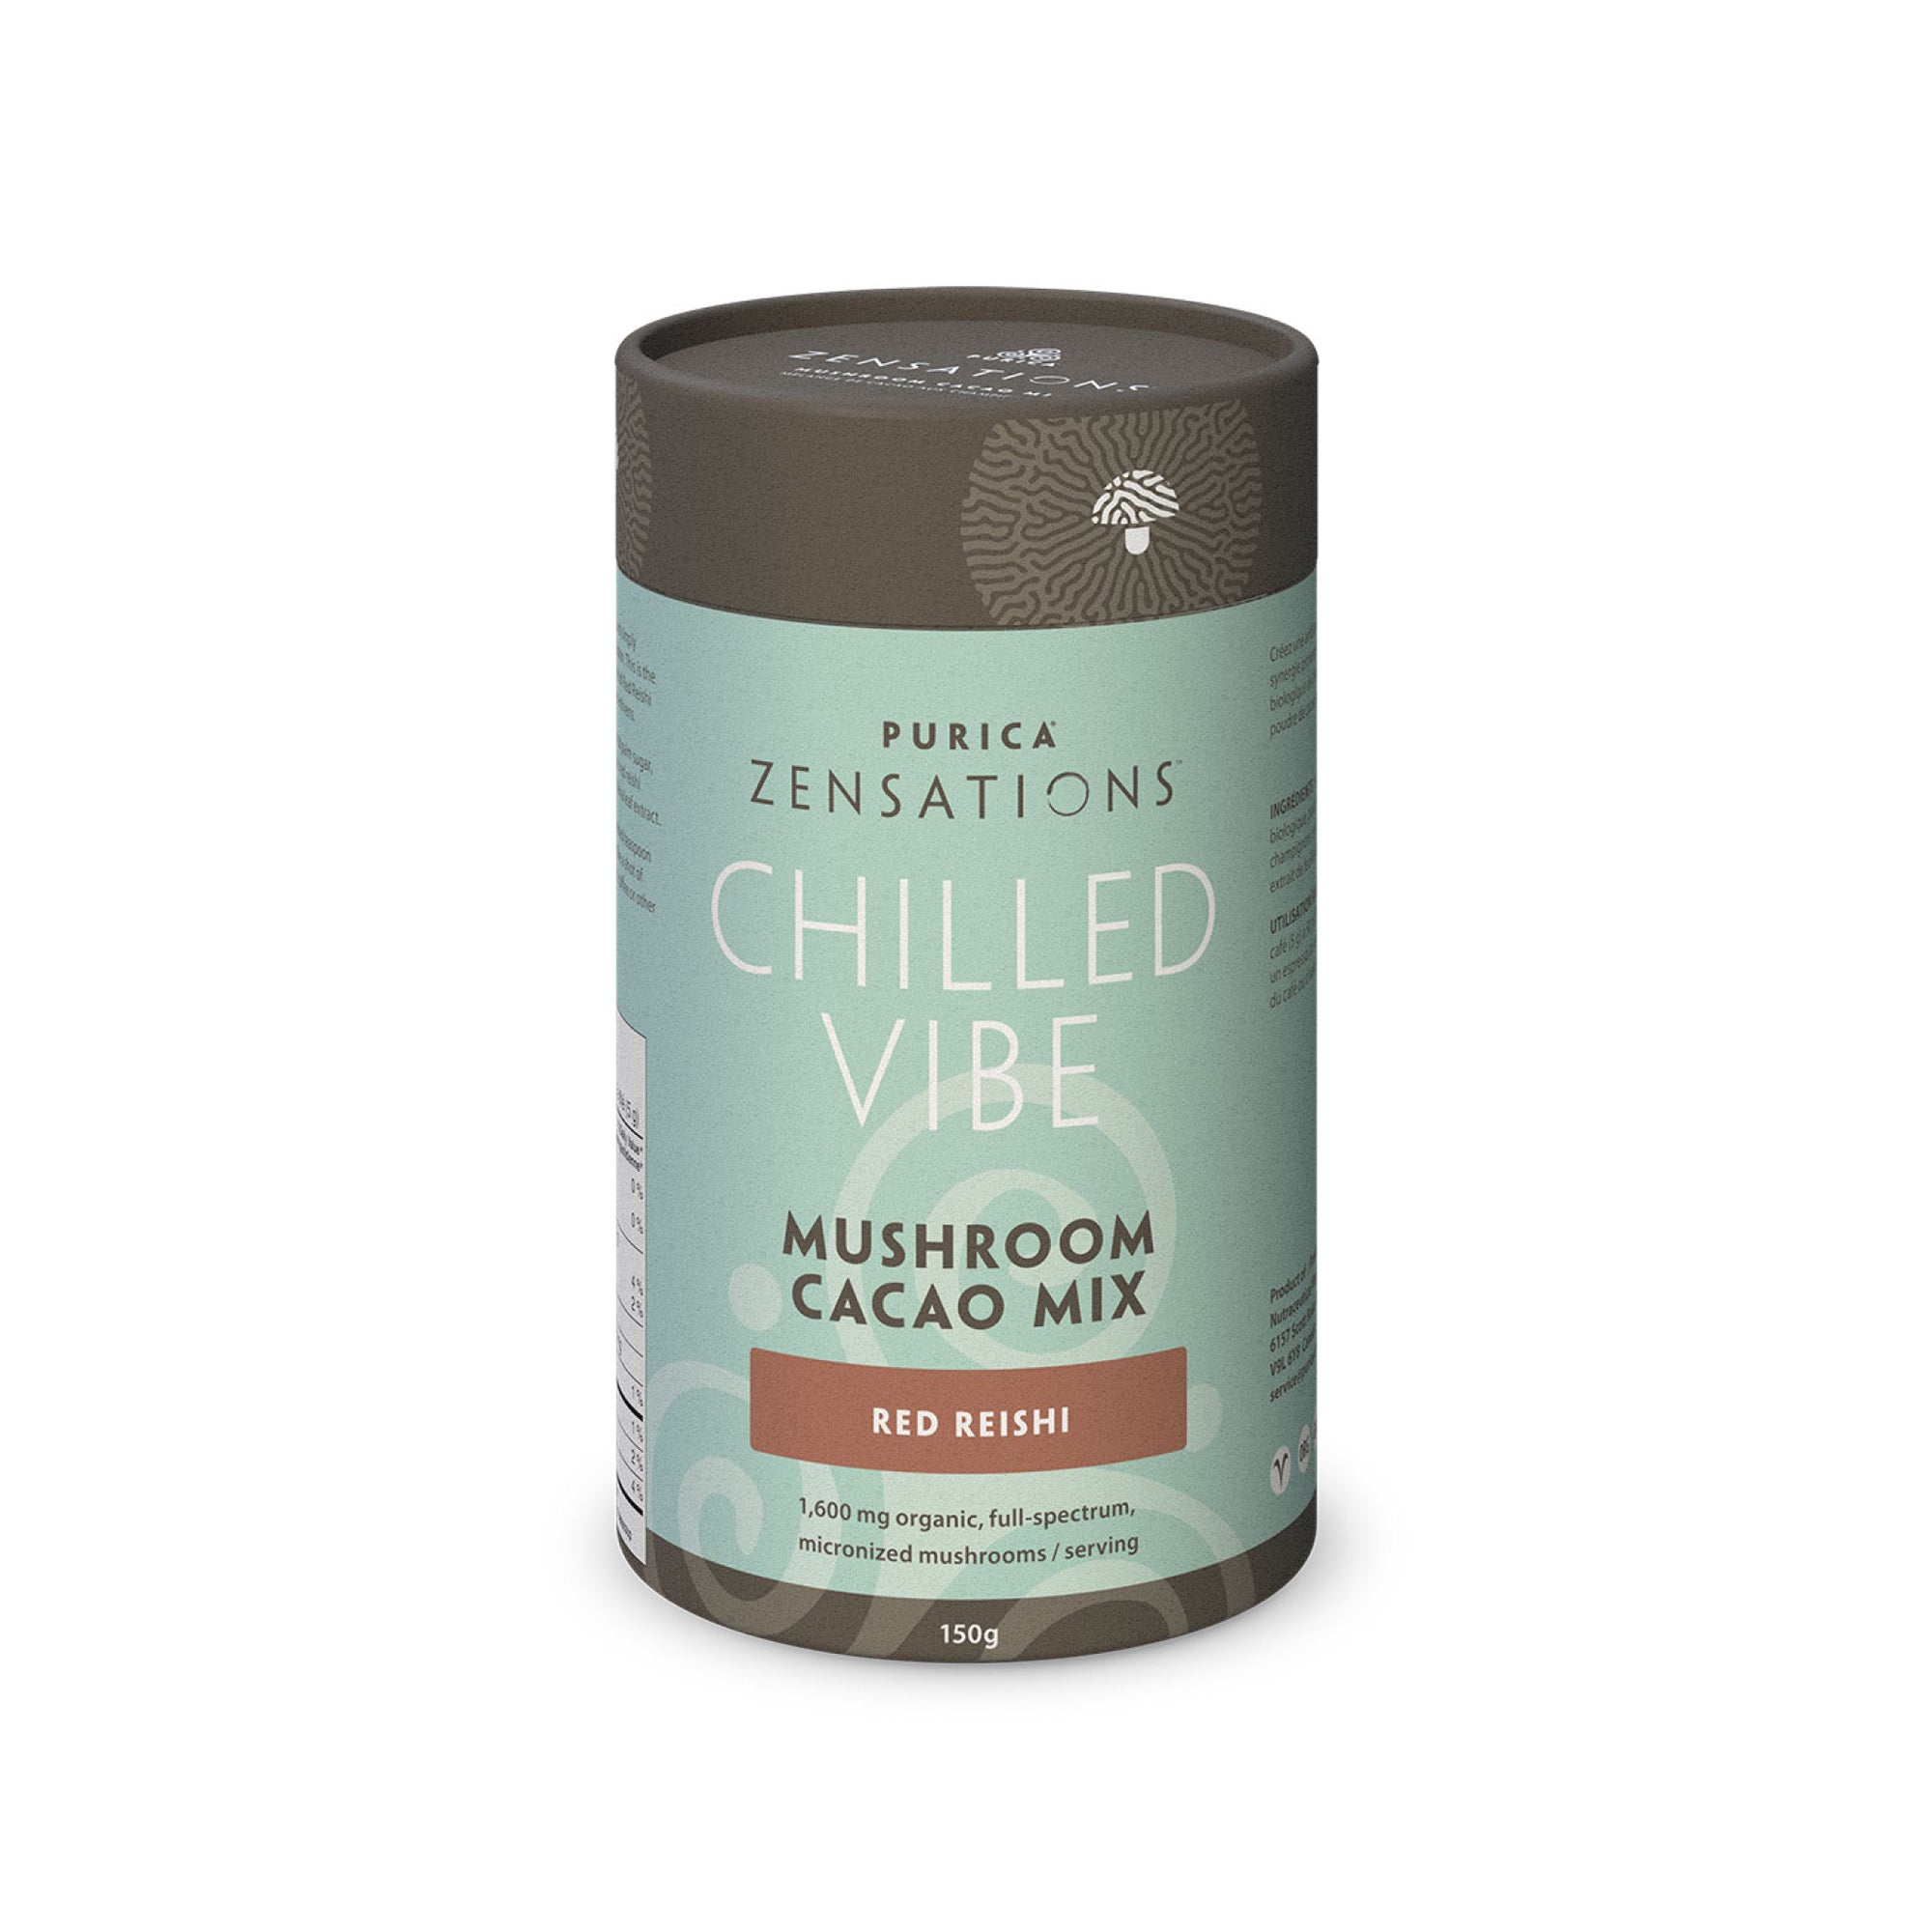 Purica Zensations Chilled Vibe Mushroom Cacao Mix 150g